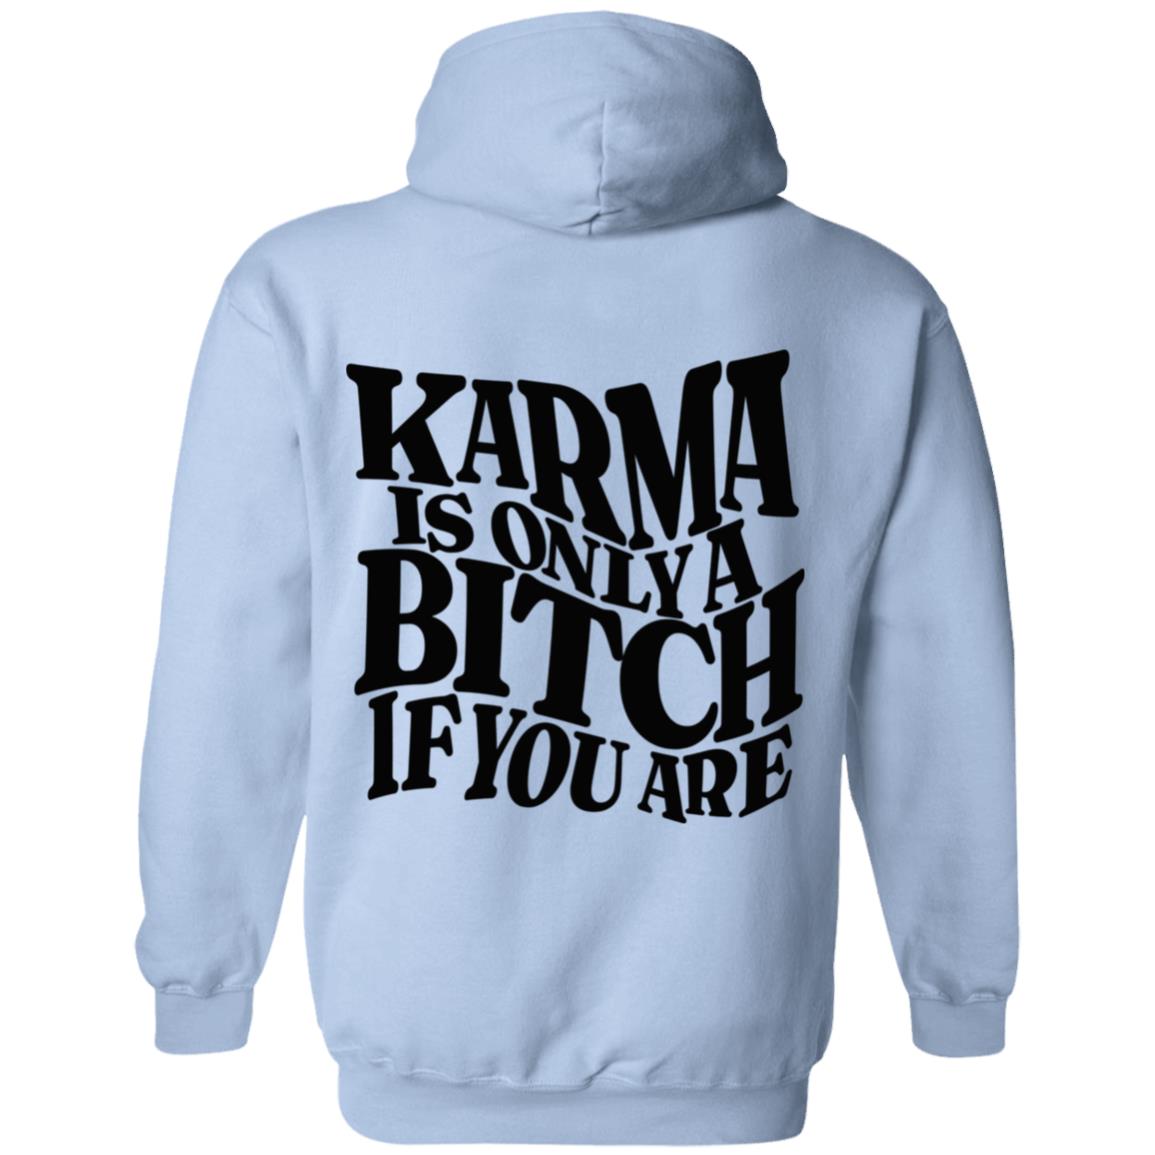 Pullover Hoodie - Karma Is Only A Bitch If You Are - Design On Back - Black Letters - Small Scorp Zone Logo On Front